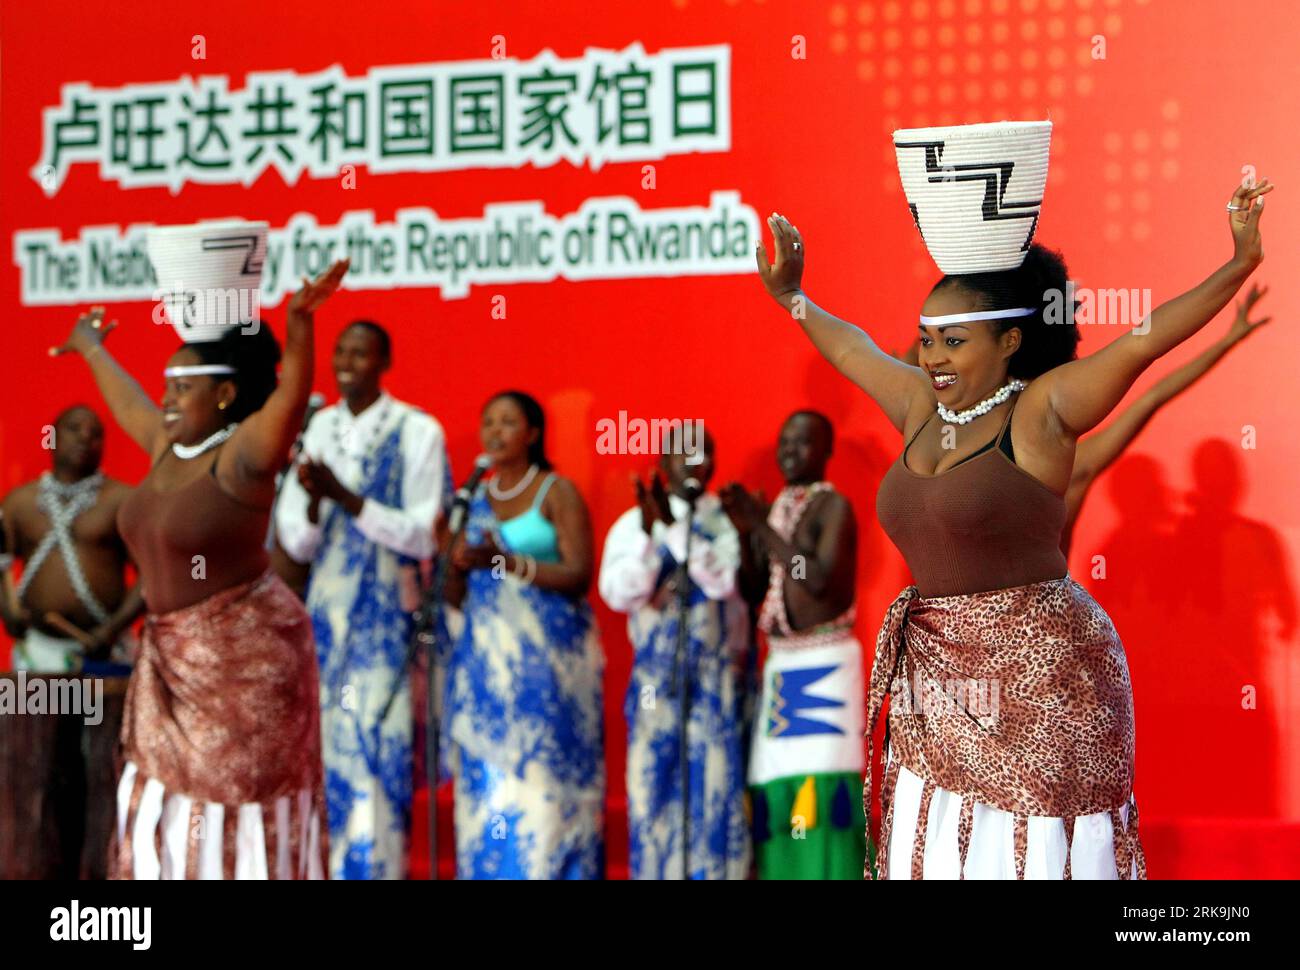 Bildnummer: 54203443  Datum: 04.07.2010  Copyright: imago/Xinhua (100704) -- SHANGHAI, July 4, 2010 (Xinhua) -- Artists perform during a ceremony marking the National Day for the Republic of Rwanda at the World Expo Park in Shanghai, east China, July 4, 2010. (Xinhua/Fan Jun) (zl) (11)WORLD EXPO-RWANDA-NATIONAL PAVILION DAY (CN) PUBLICATIONxNOTxINxCHN Gesellschaft Land und Leute Nationalfeiertag Ruanda EXPO Folklore Tanz Kultur kbdig xdp 2010 quer     Bildnummer 54203443 Date 04 07 2010 Copyright Imago XINHUA  Shanghai July 4 2010 XINHUA Artists perform during a Ceremony marking The National D Stock Photo